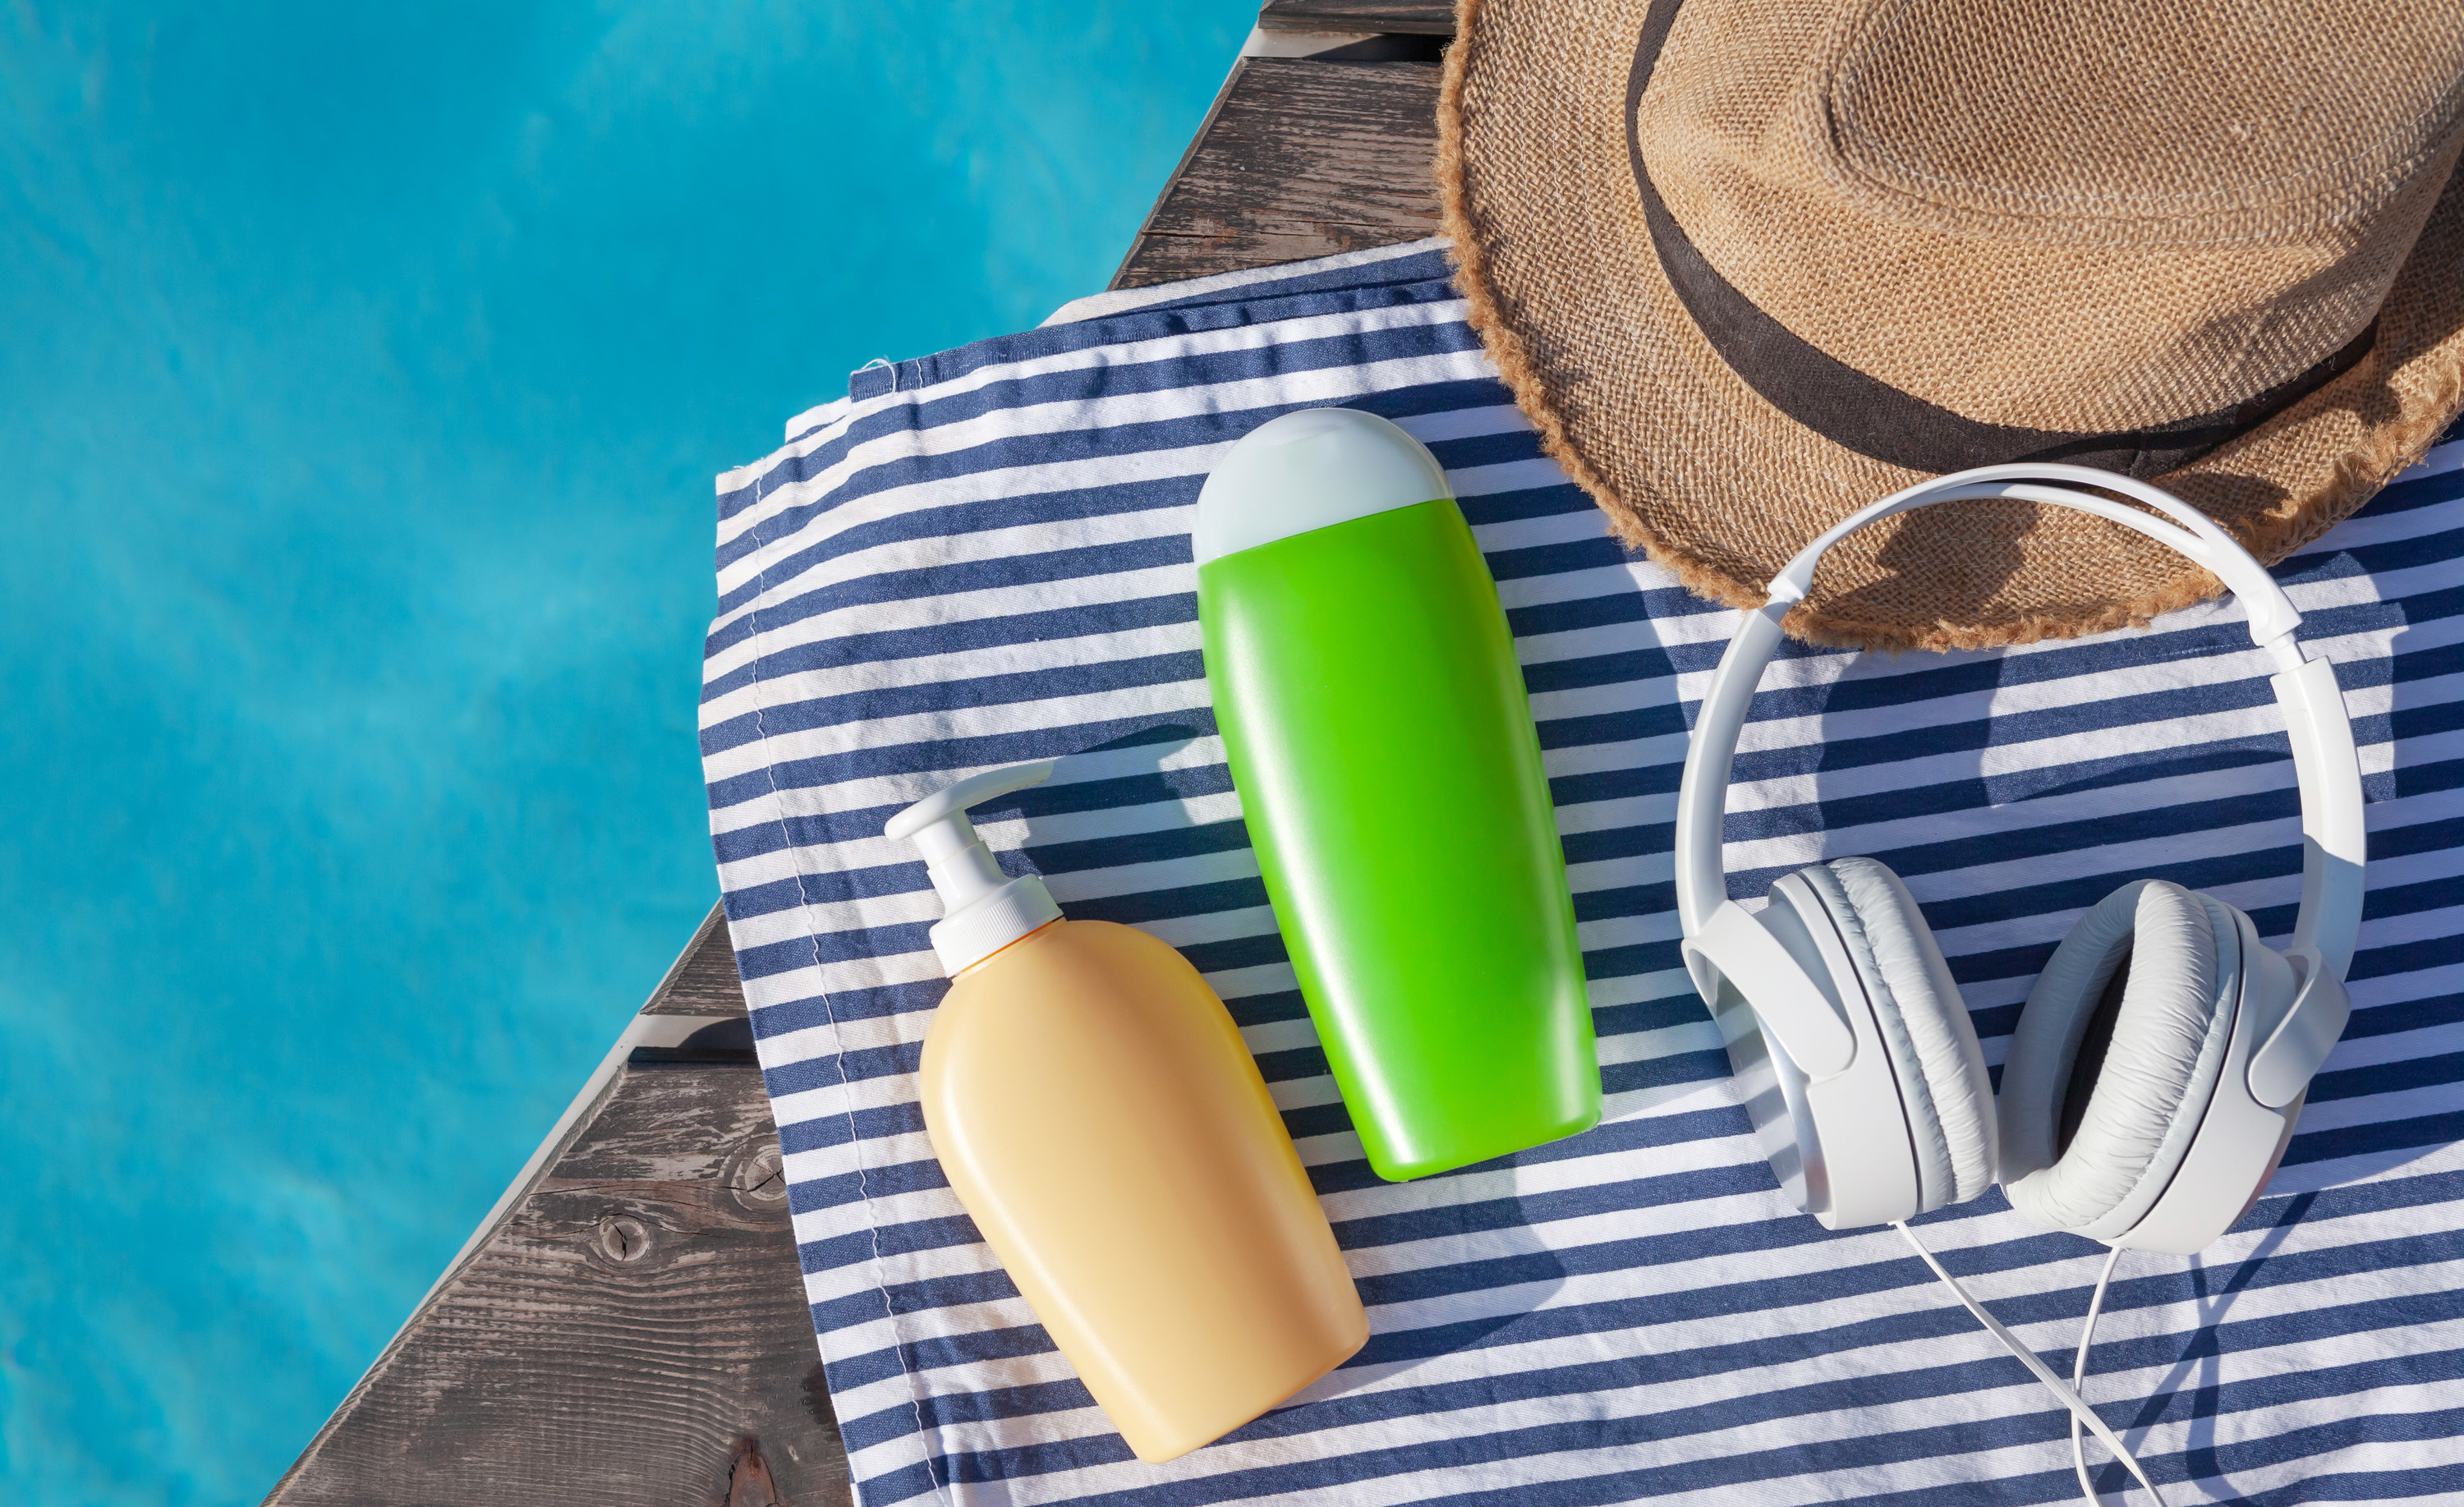 Two bottles of sunscreen on a striped towel poolside next to headphones and a sun hat